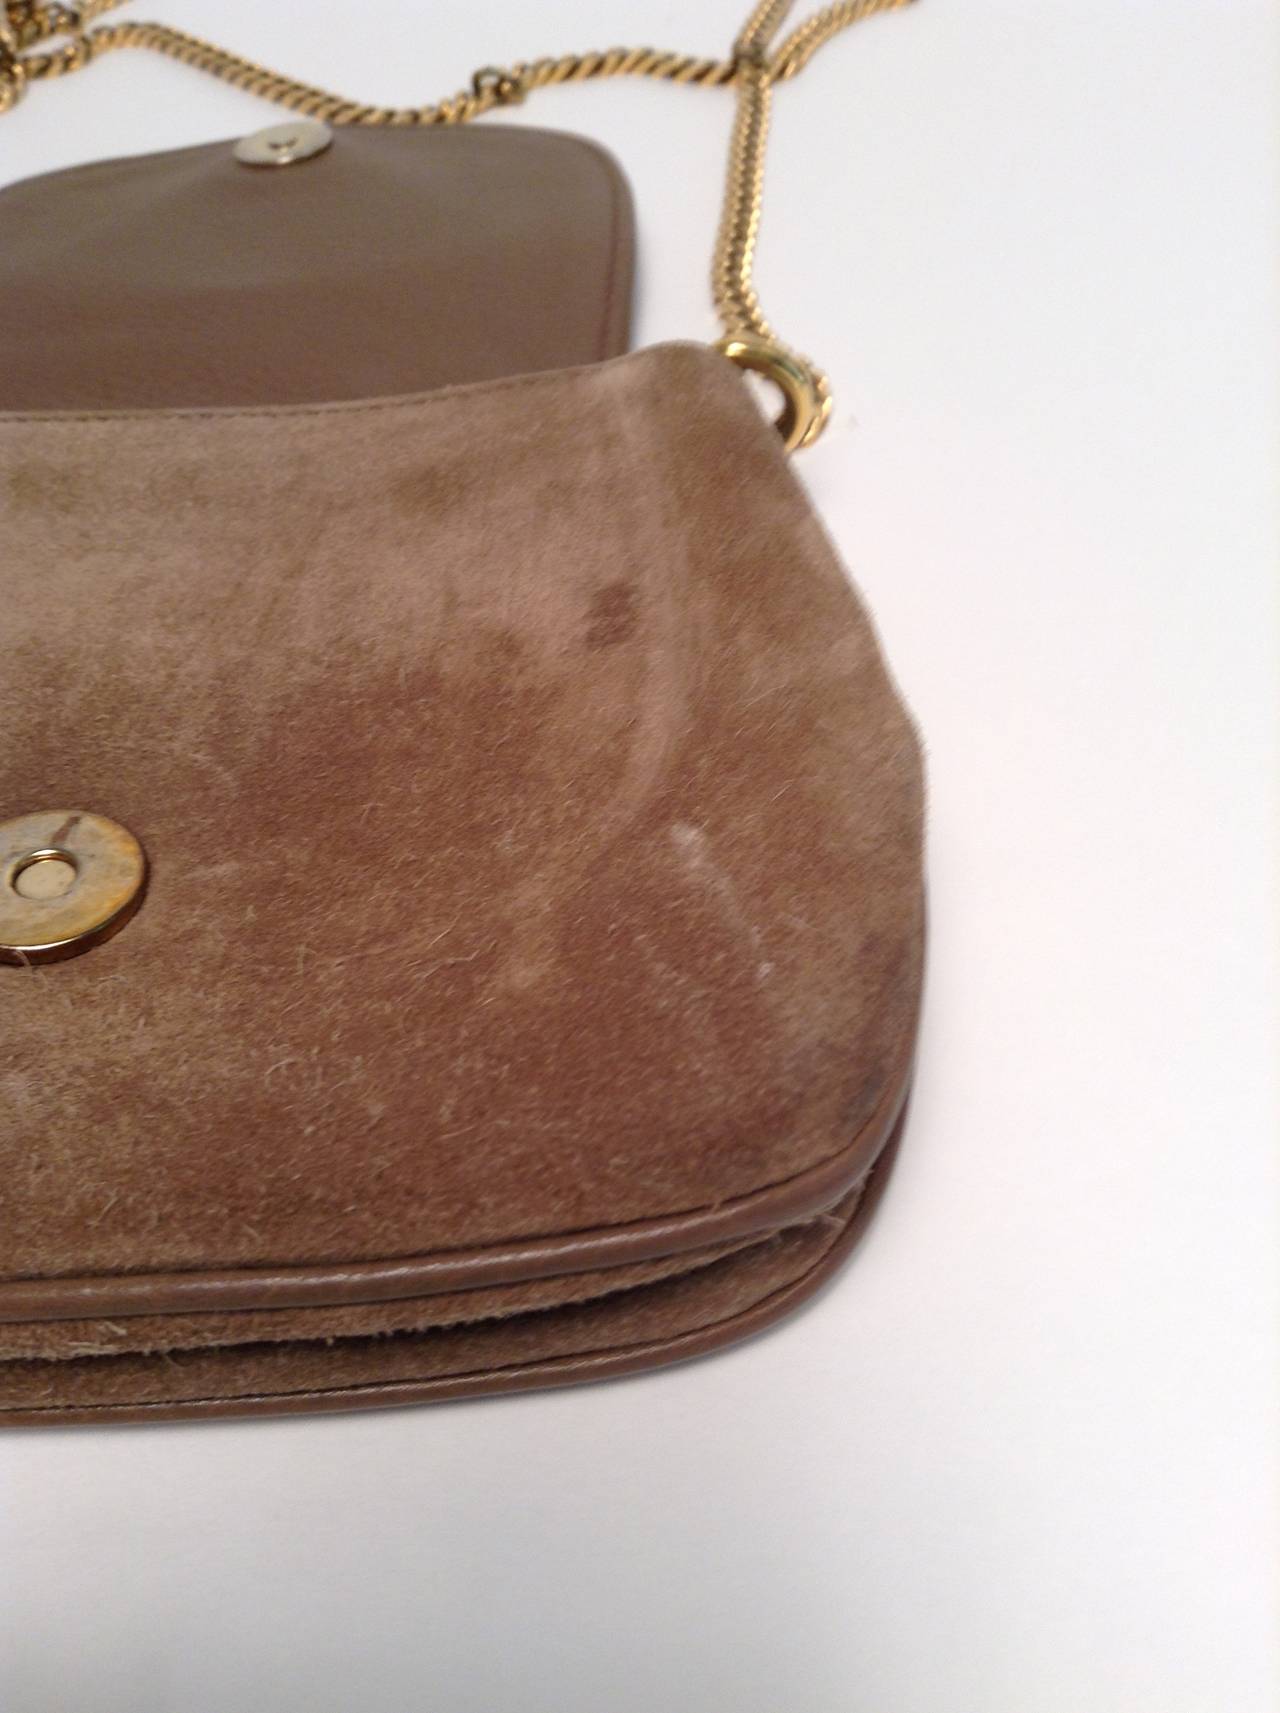 Gucci Taupe Suede Gold Chain Bag 1973 Reissue 1